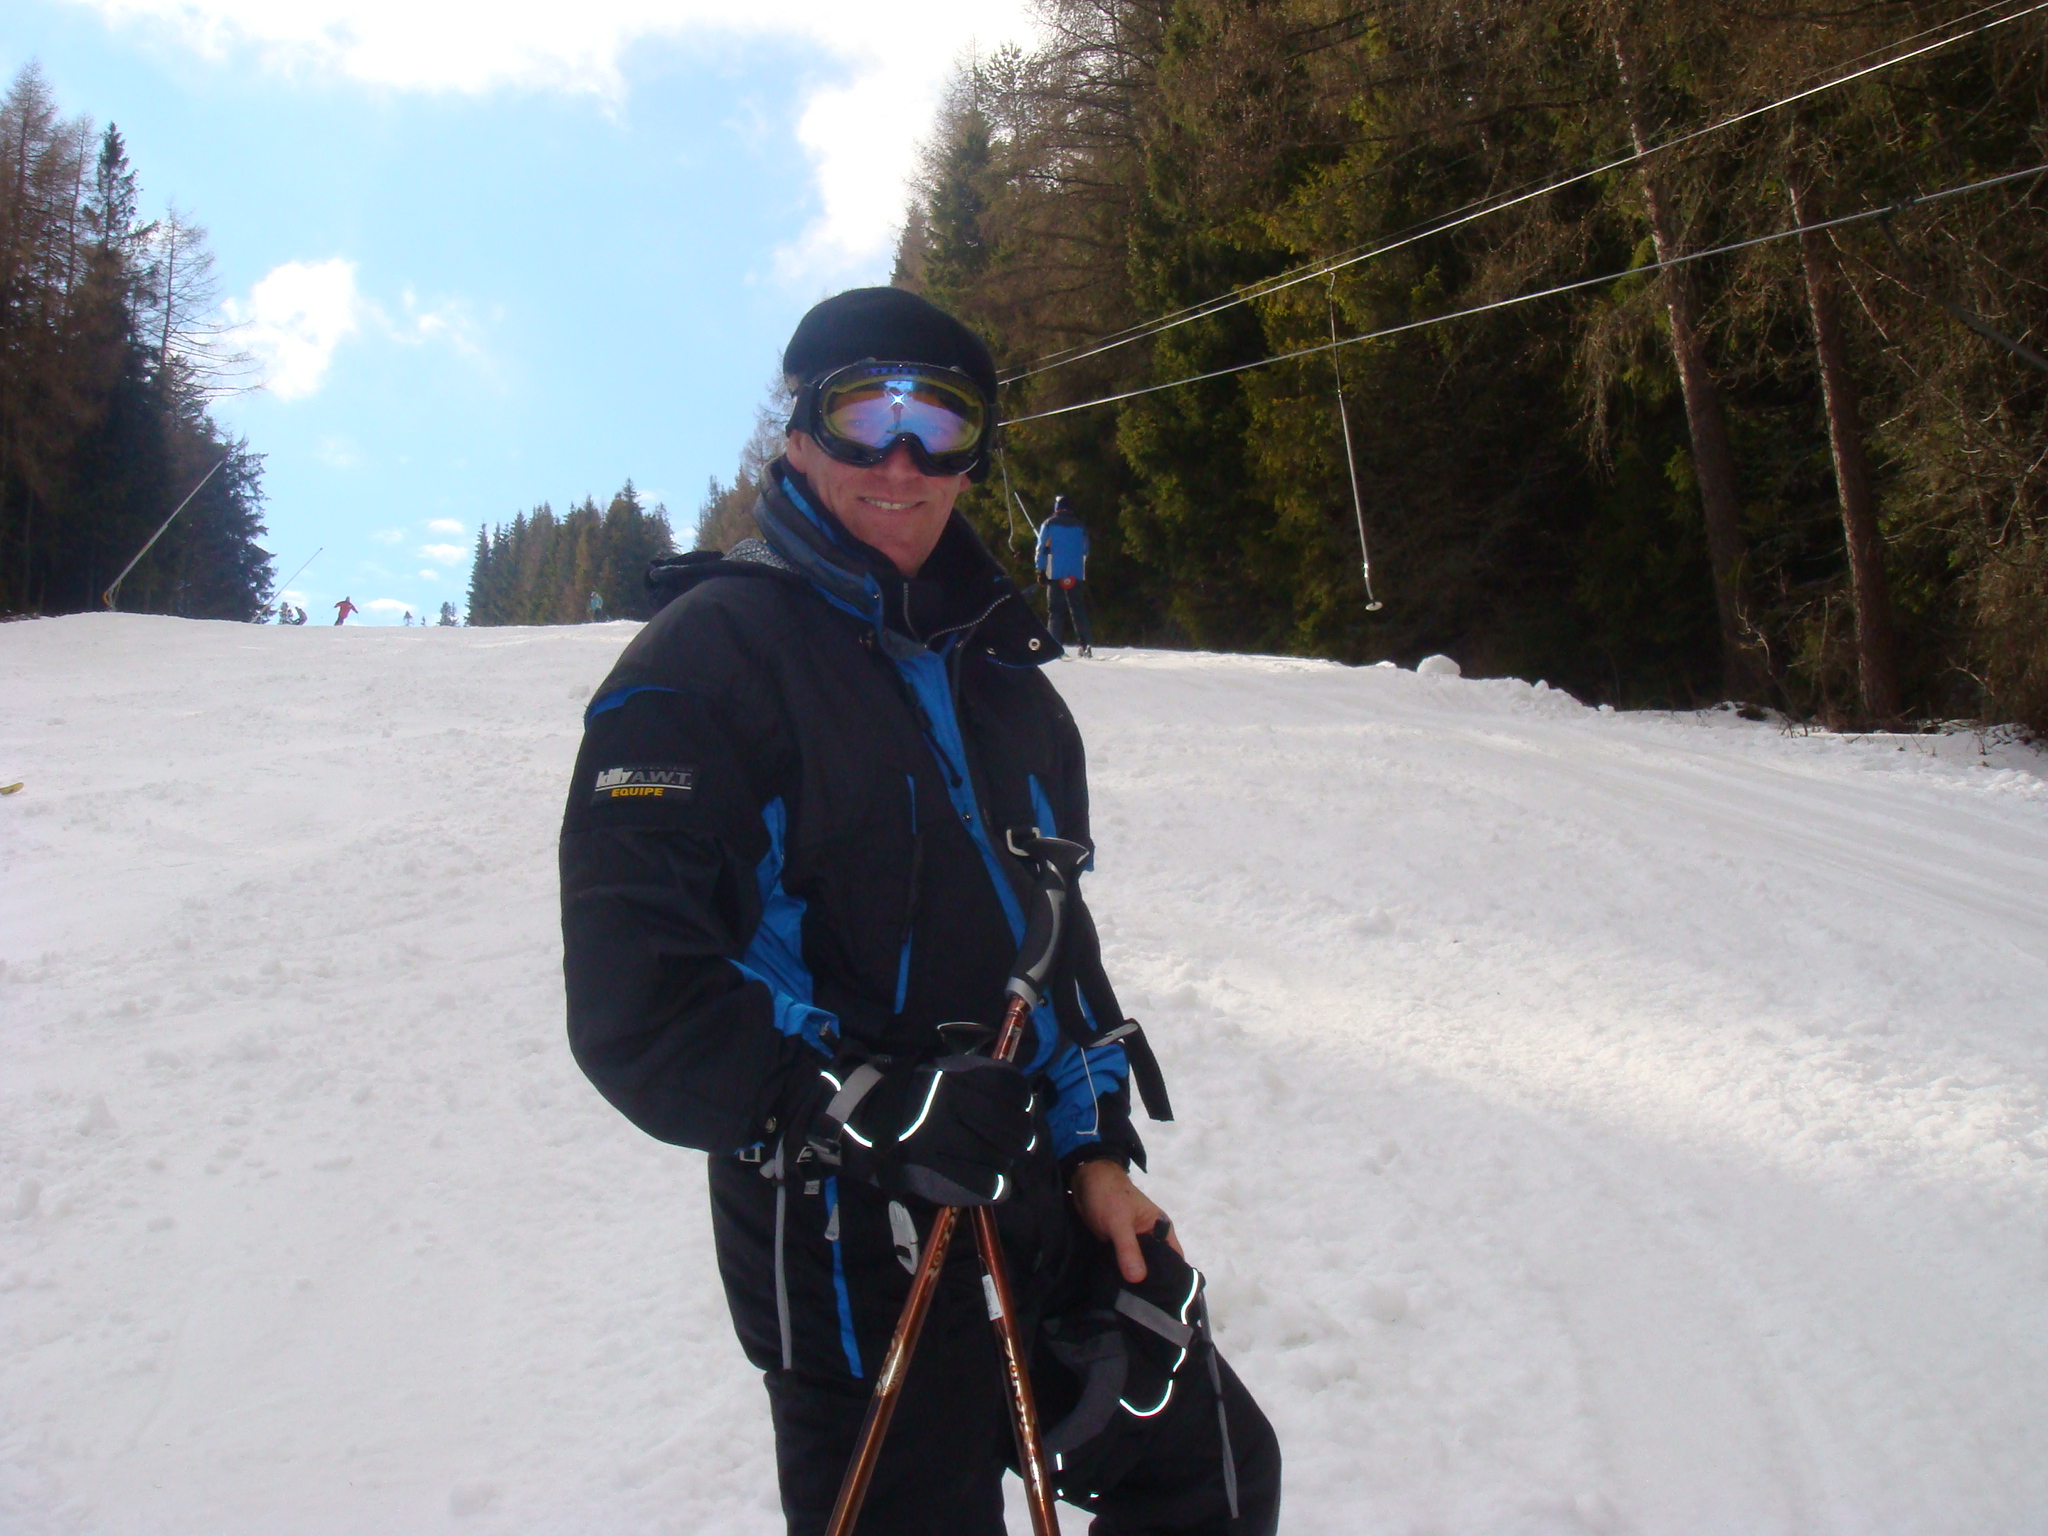 Randall Perry skiing in Poland